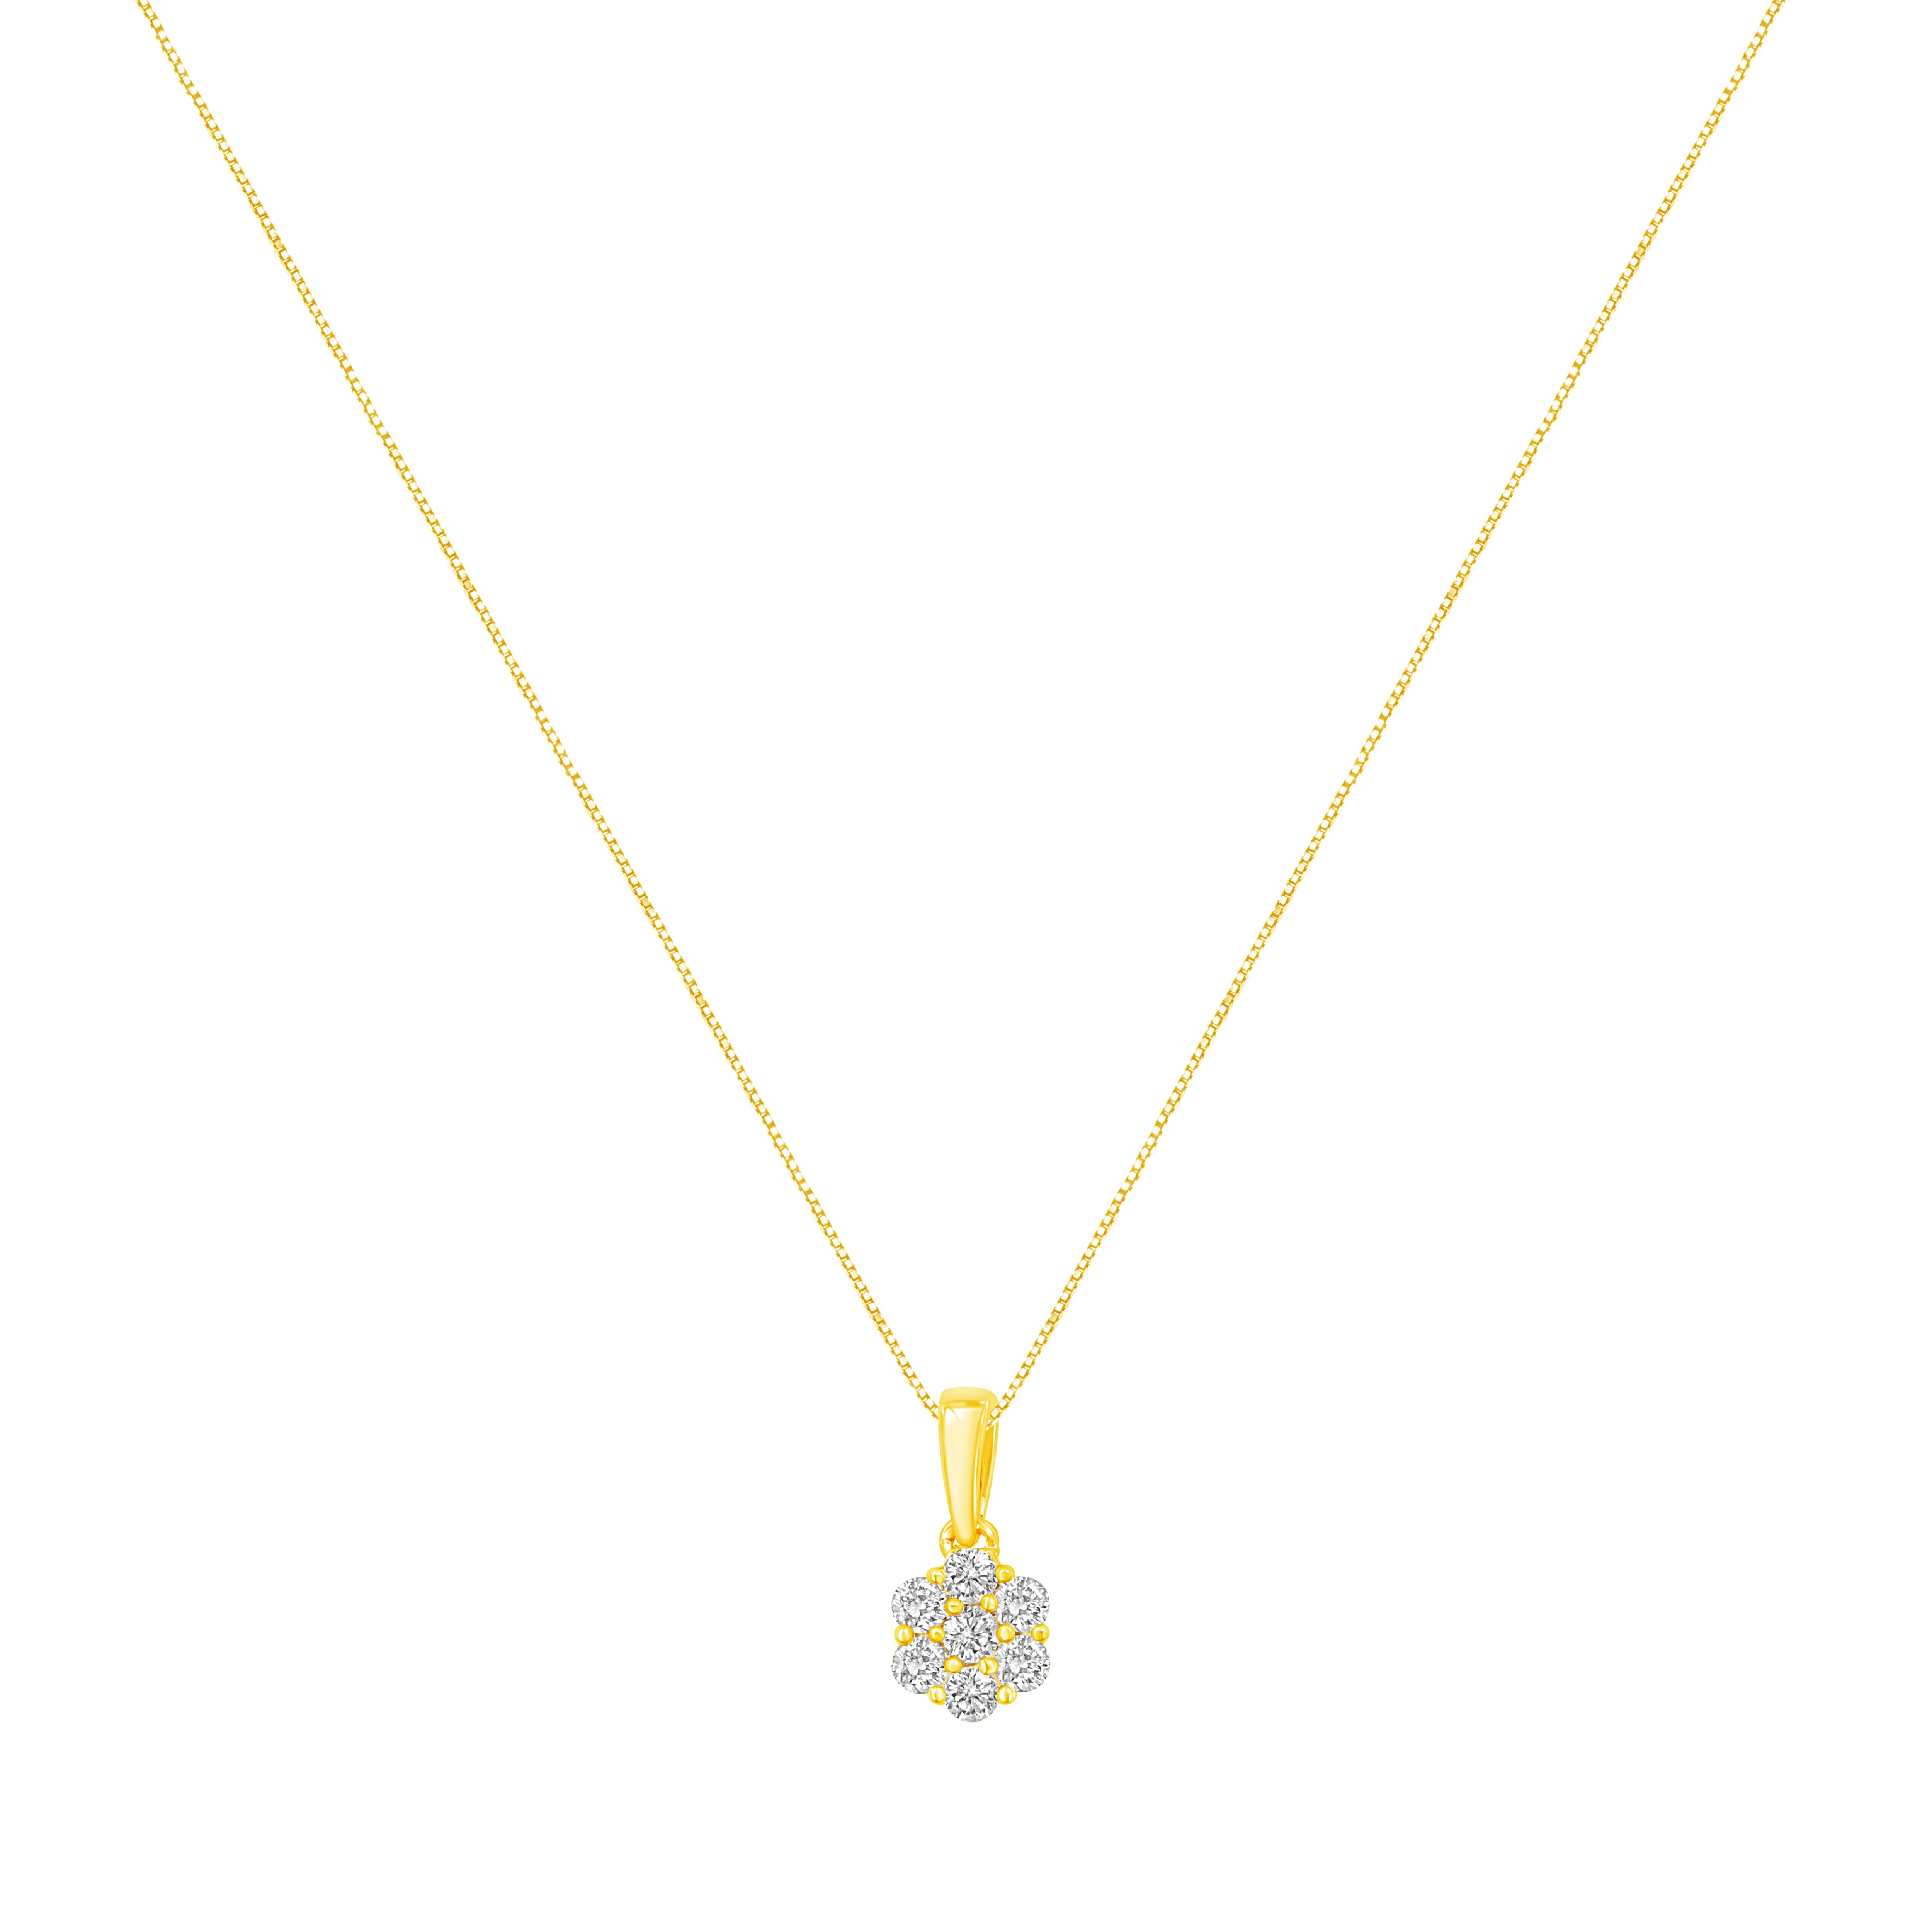 This stunning floral cluster pendant is designed with 7 natural, round-cut diamonds in a glistening prong setting. Designed in warm 14k yellow gold, this necklace boasts 1/2 ct tdw. This is the perfect accessory for any night out.

'Video Available